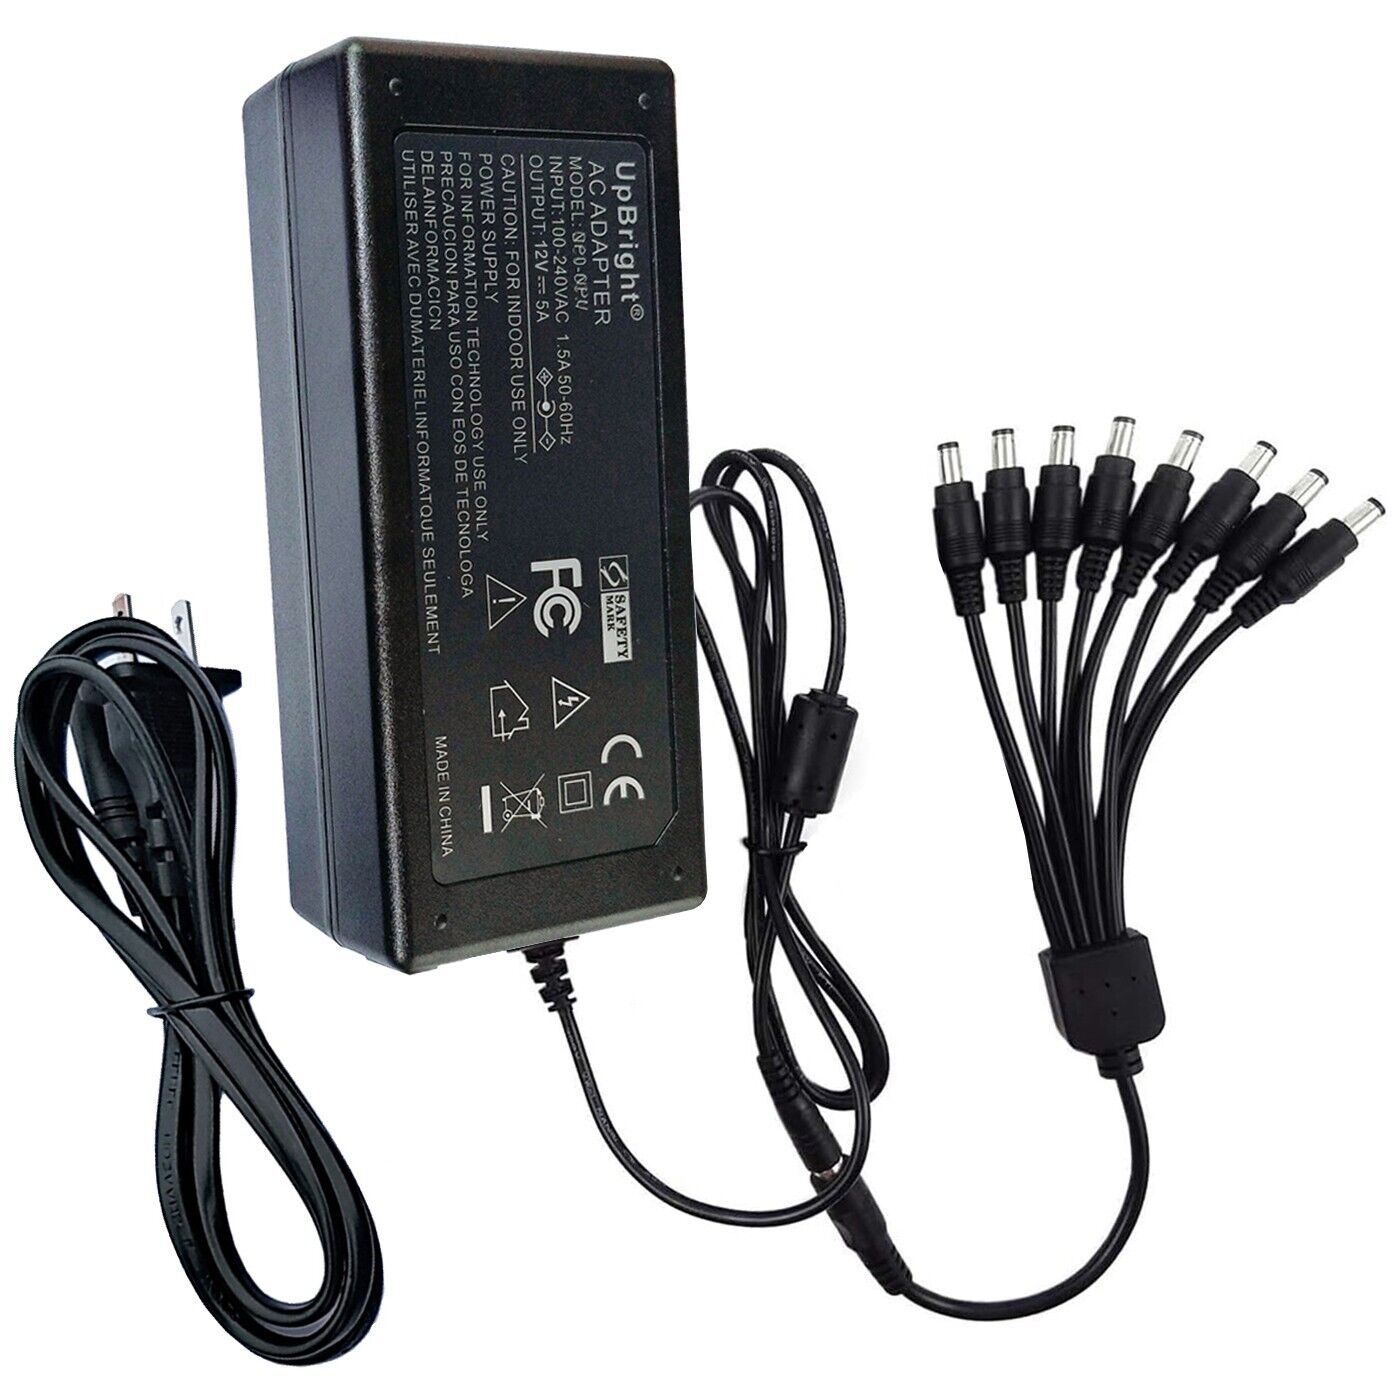 12V 5A 60W 100V-240V AC/DC Adapter with 8-Way Power Splitter For Security Camera